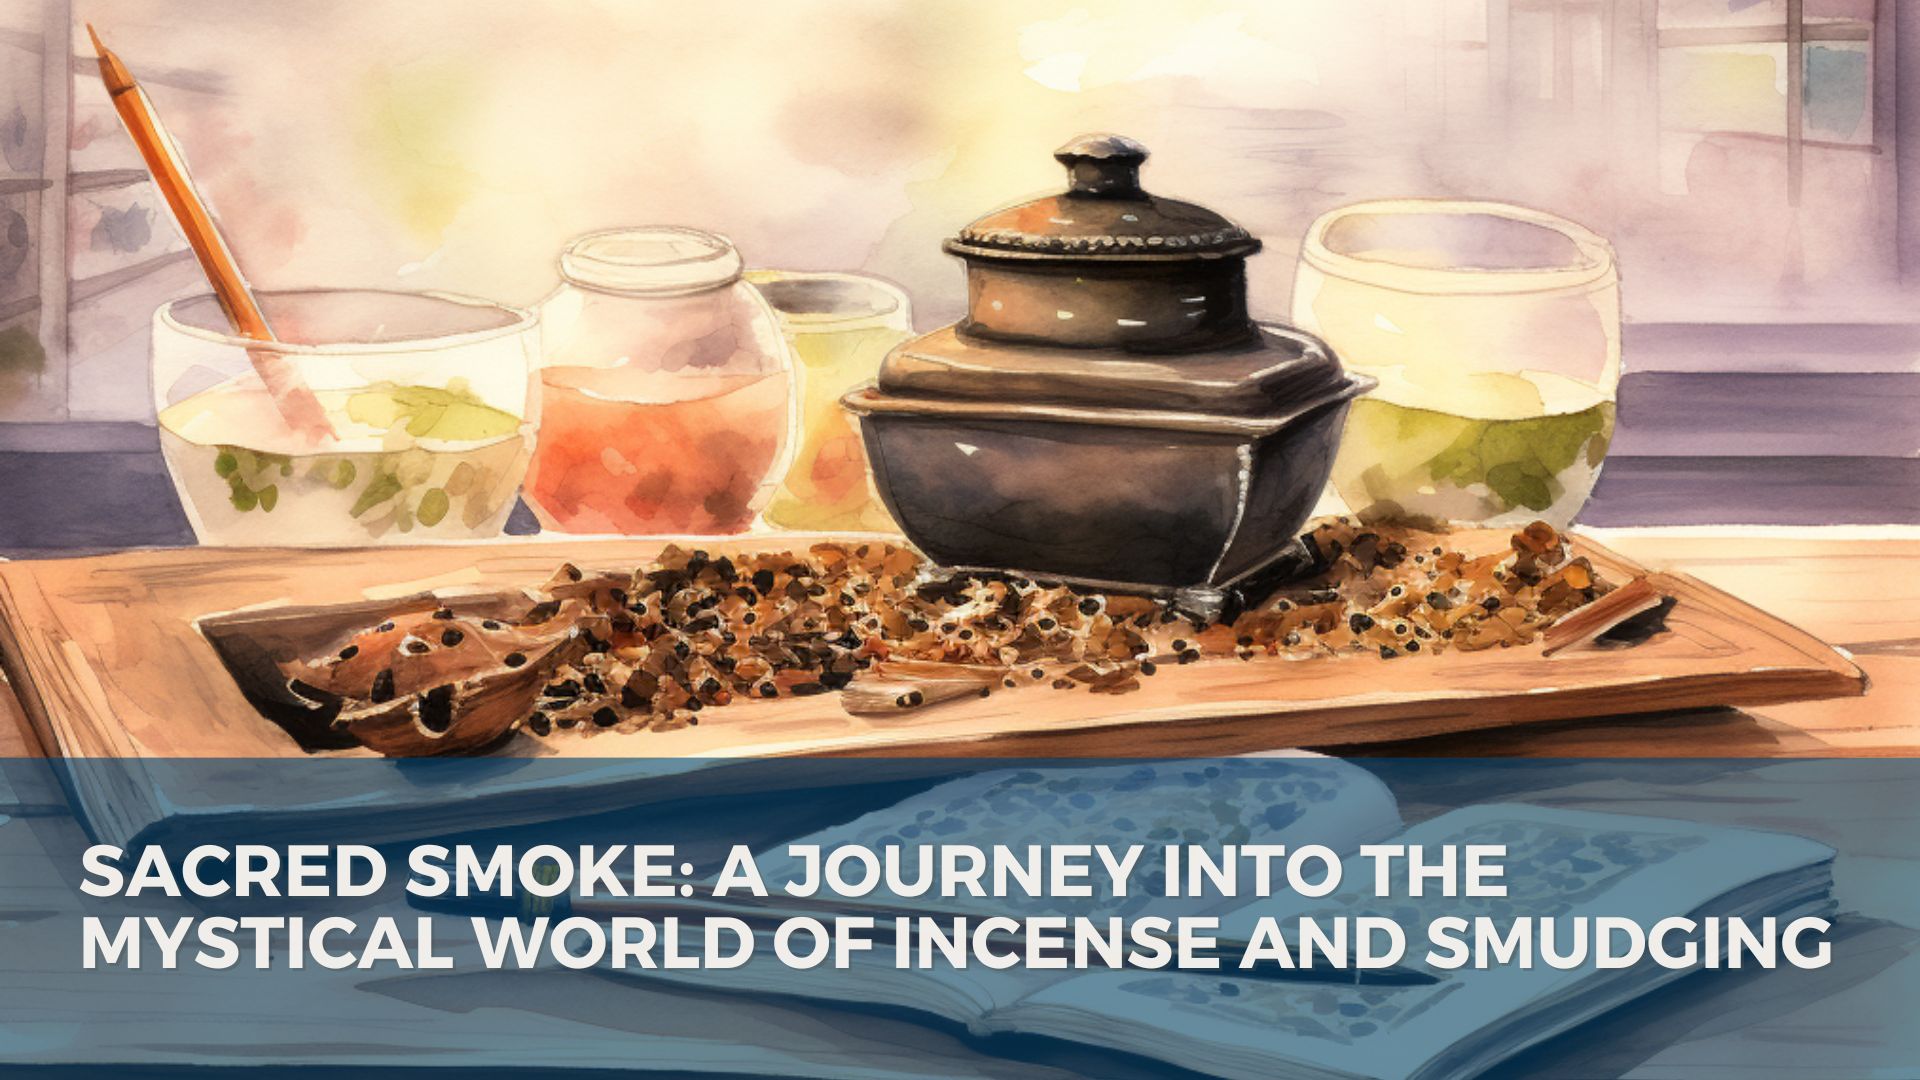 A Journey into the Mystical World of Incense